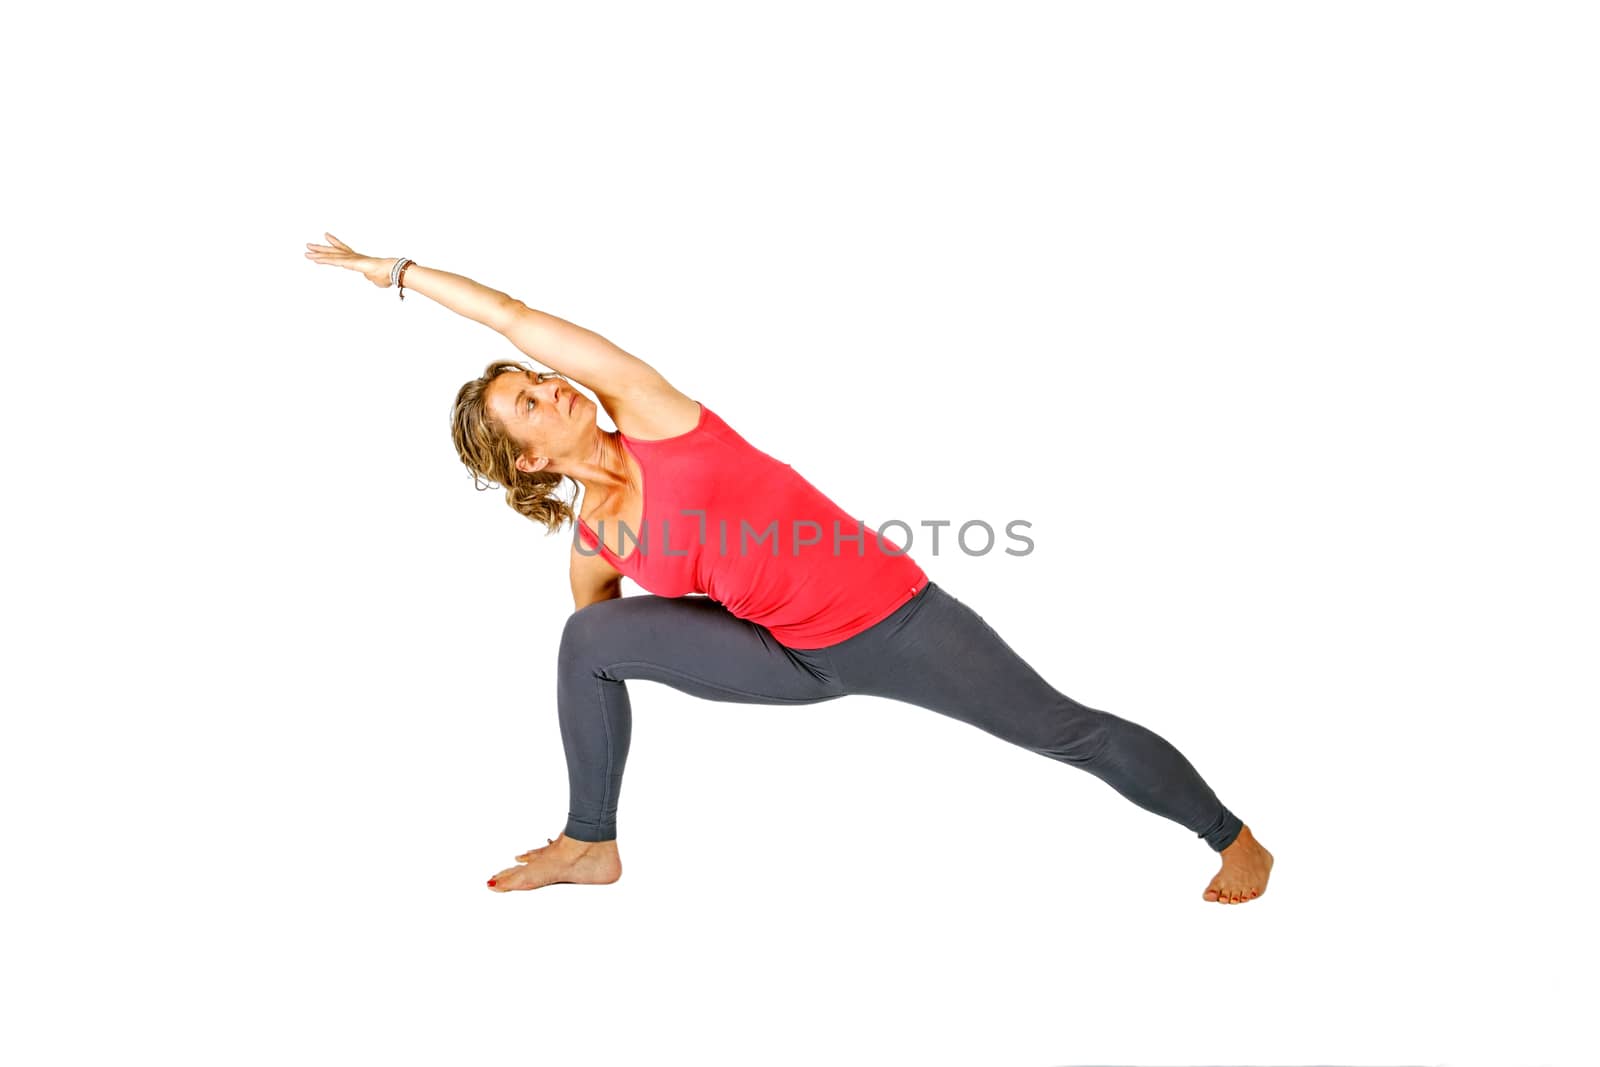 Young woman making a yoga posture on a white background by devy